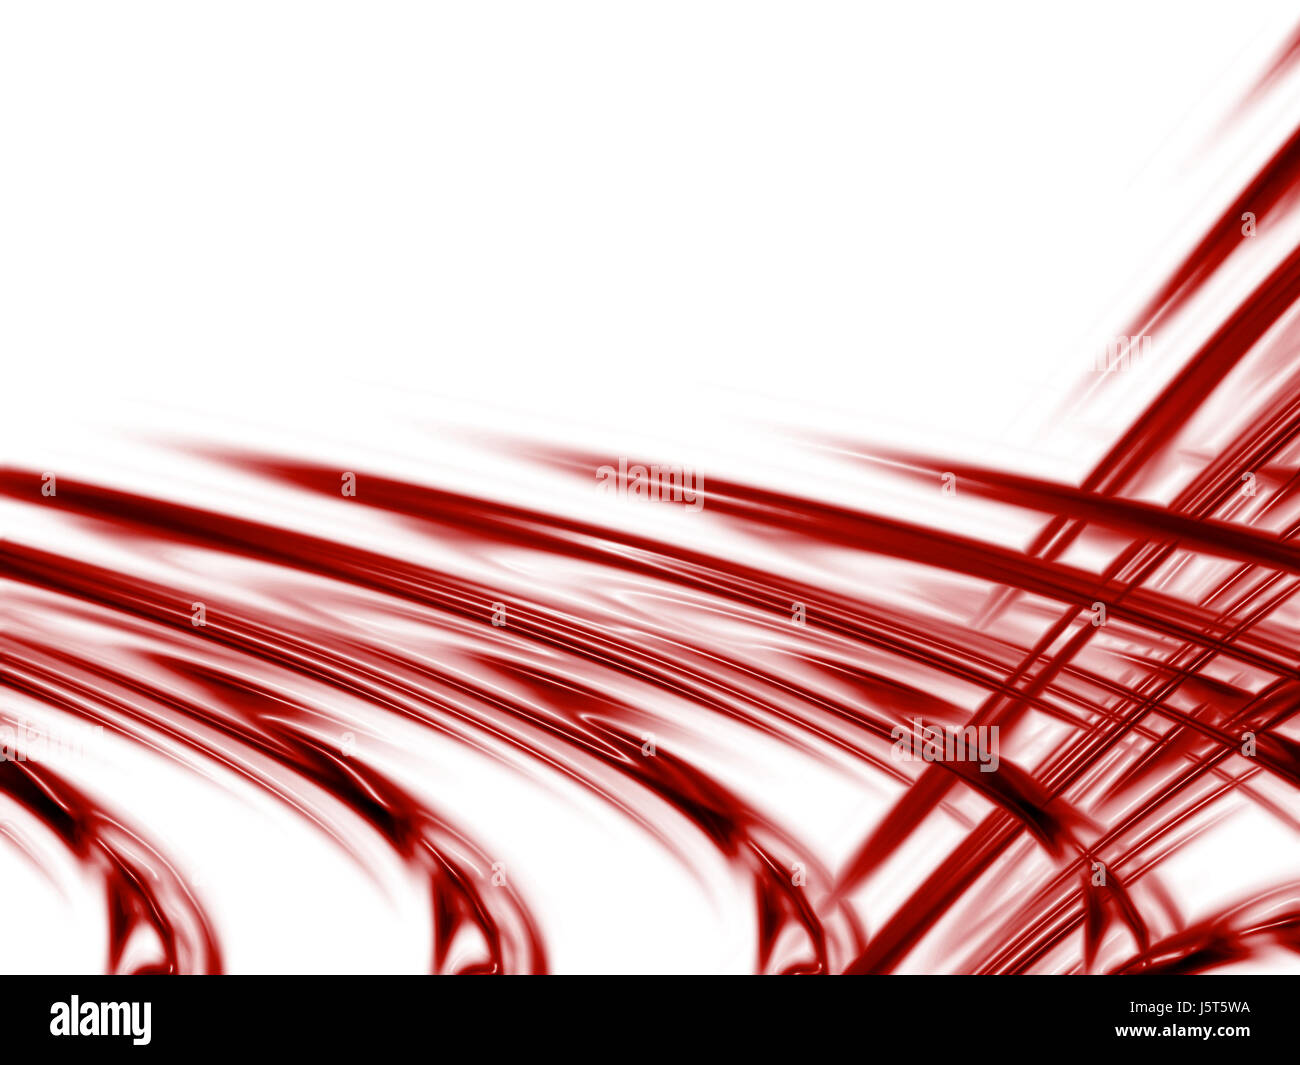 graphic futuristic digital abstract photo picture image copy deduction backdrop Stock Photo